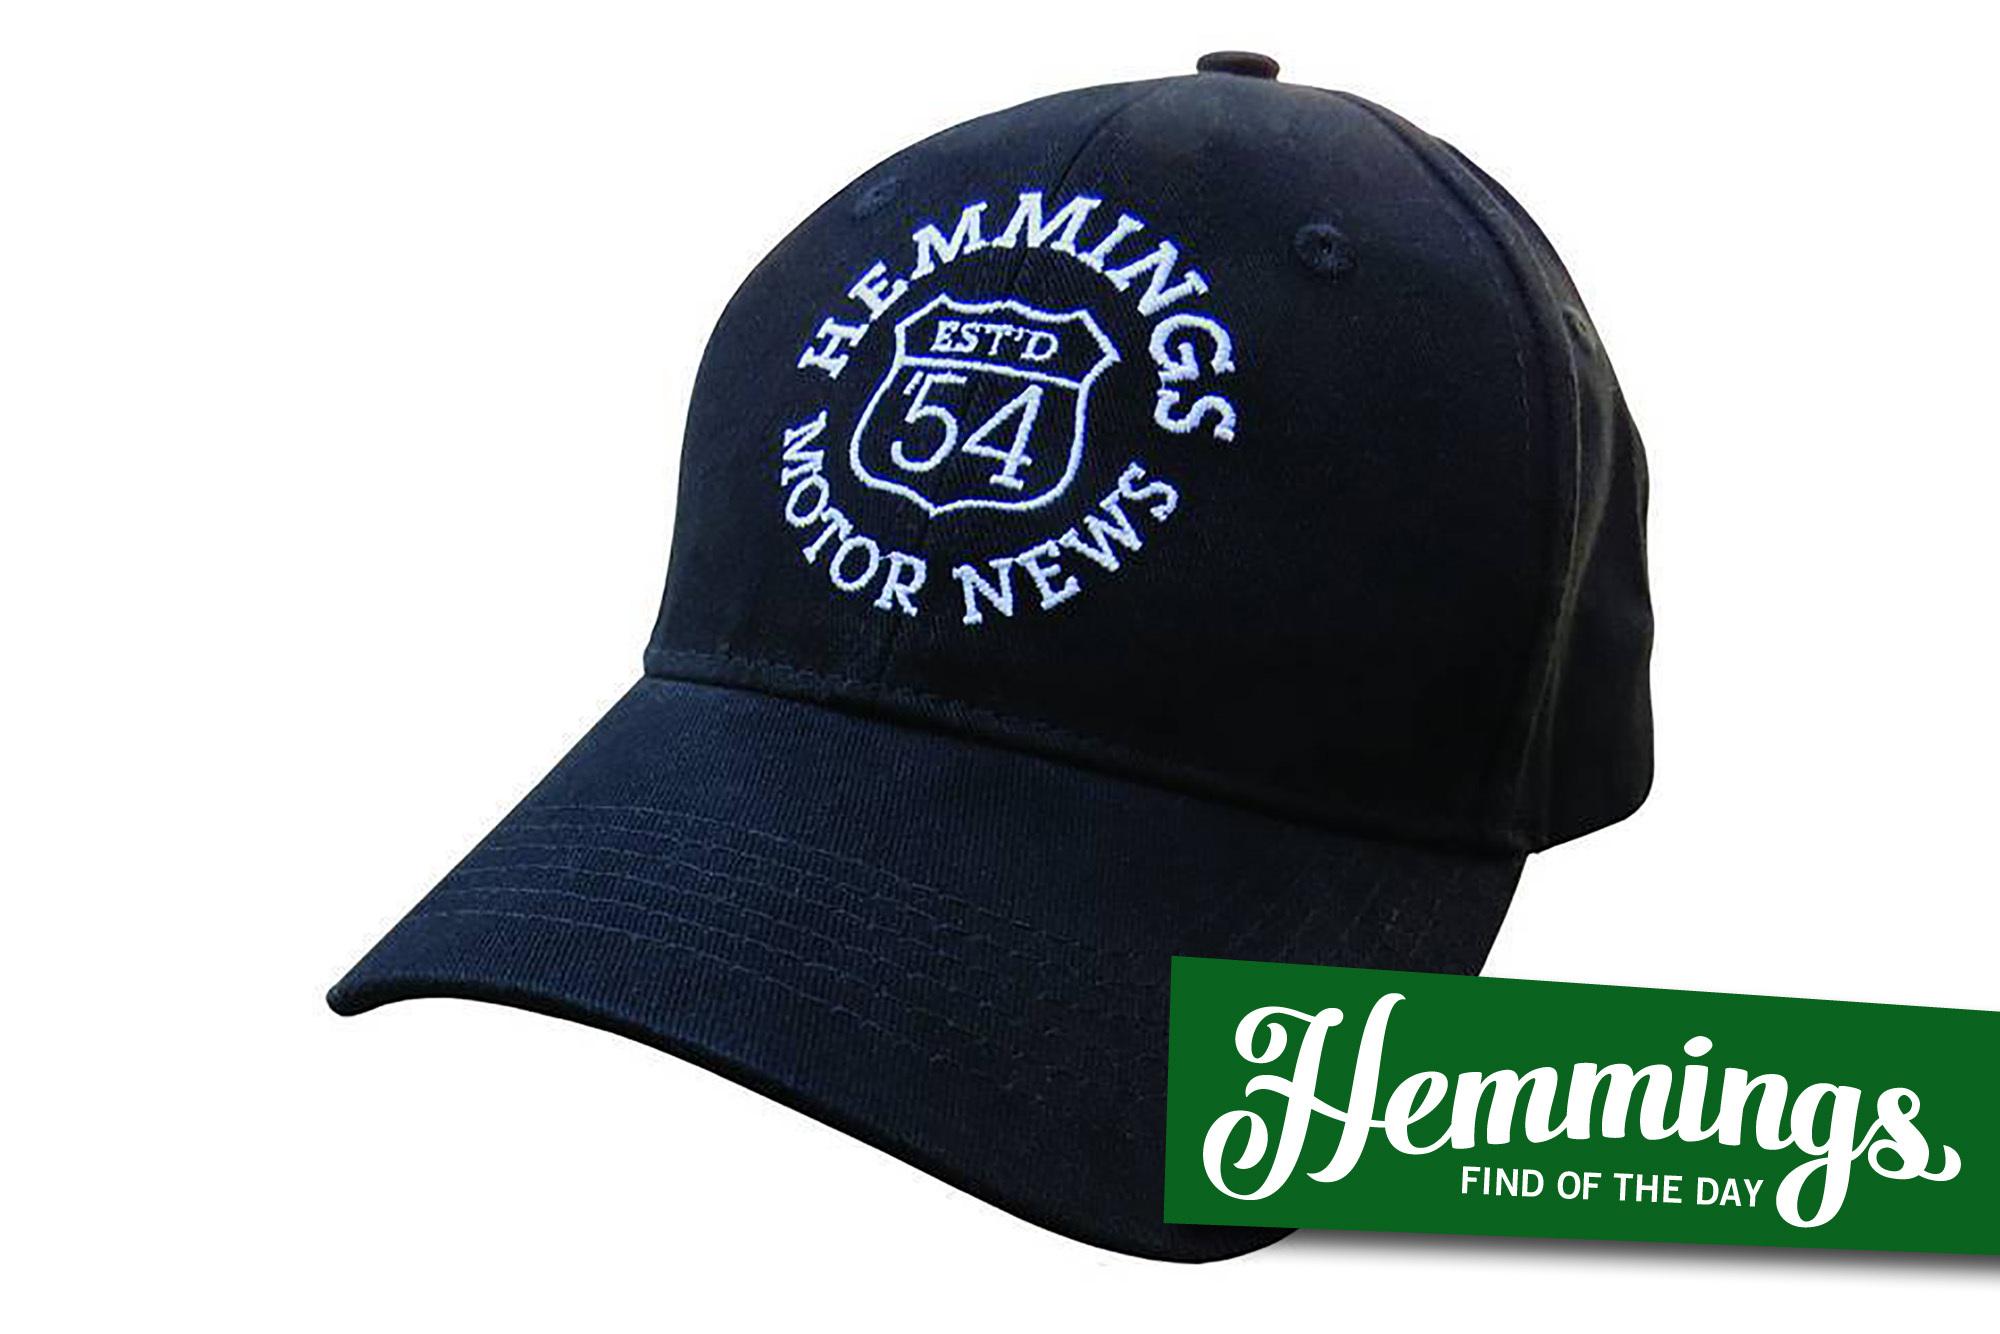 Hemmings Find of the Day: Black Friday and Cyber Monday deals on Hemmings merchandise and ads